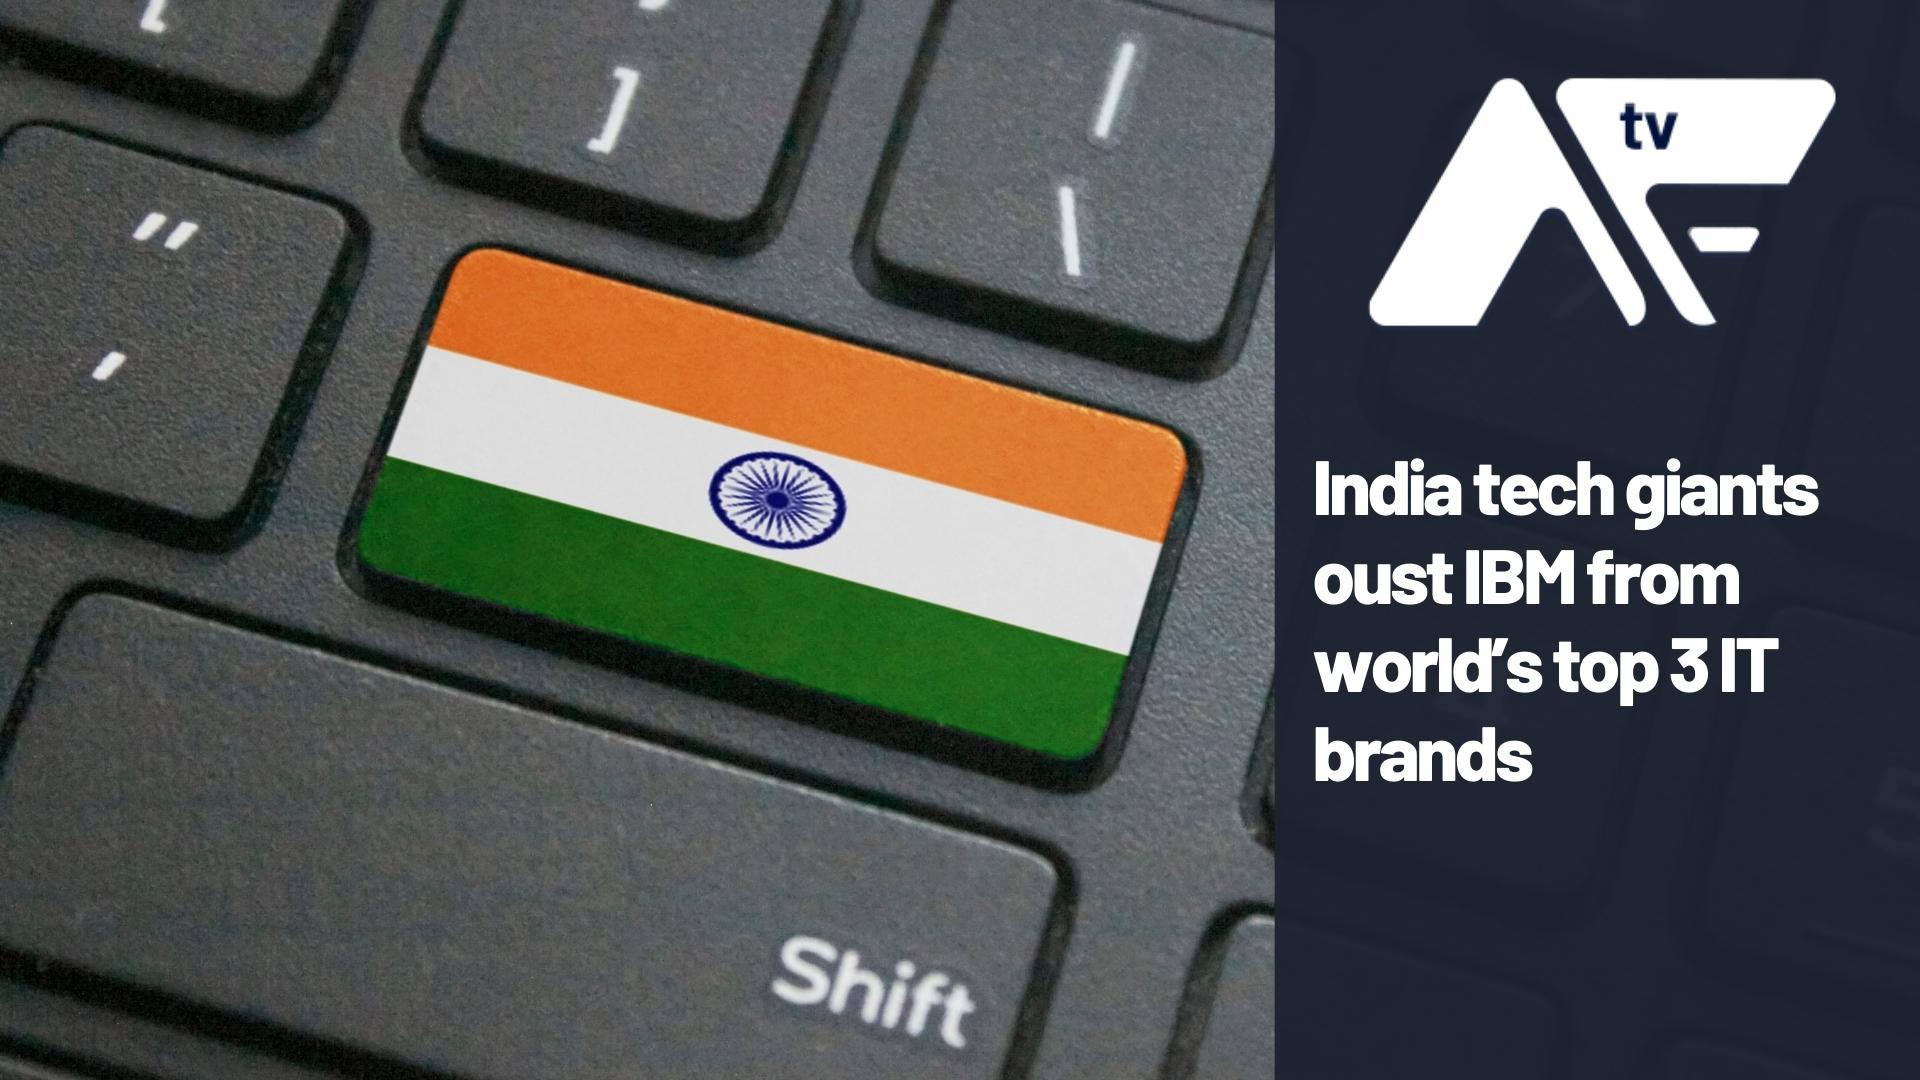 AF TV – India tech giants oust IBM from world’s top 3 IT brands